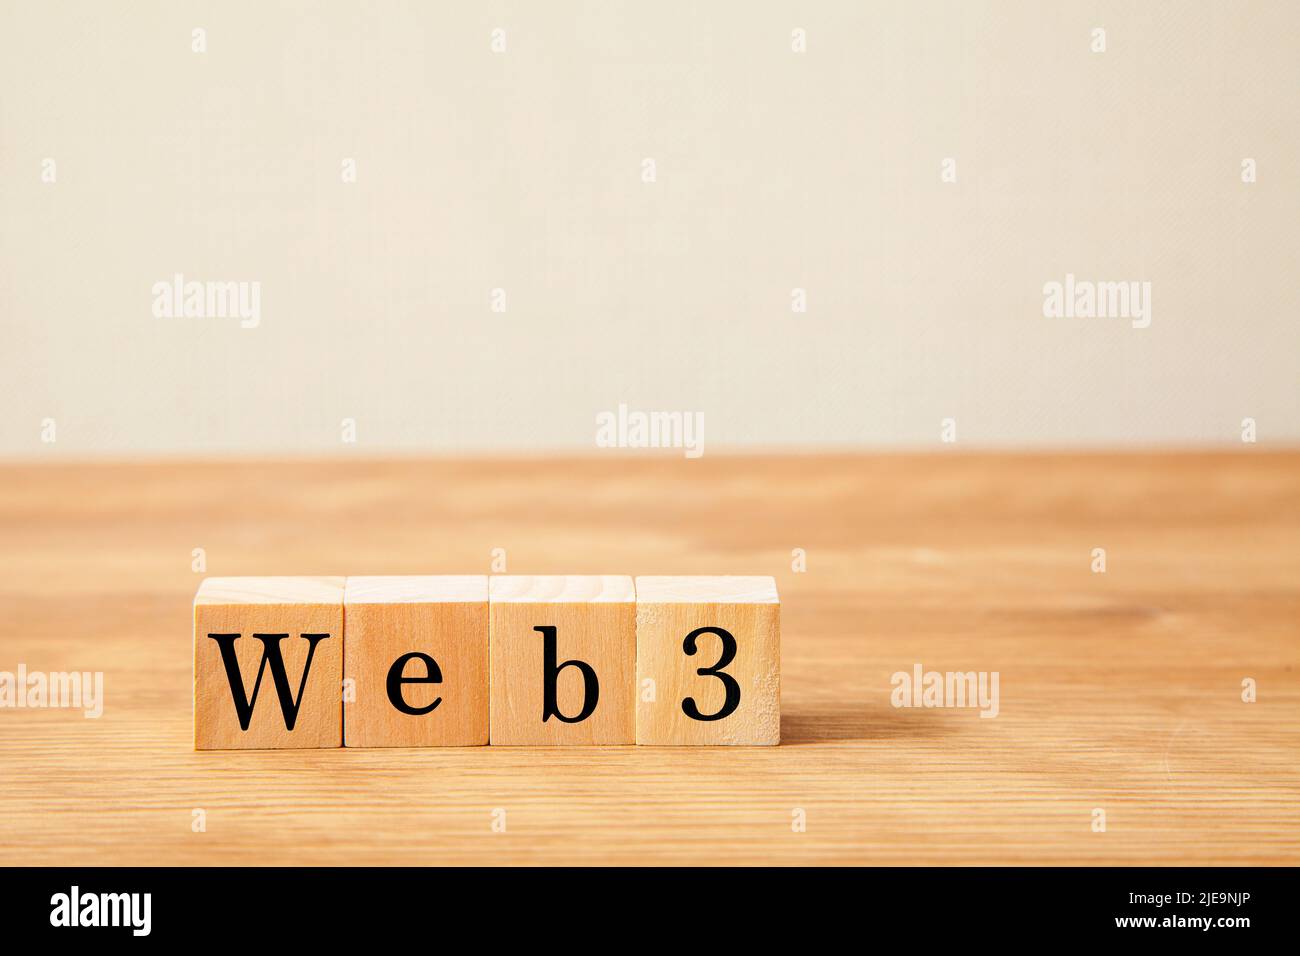 web3 characters. Written on four wooden blocks. Black letters. Wooden table background. Stock Photo